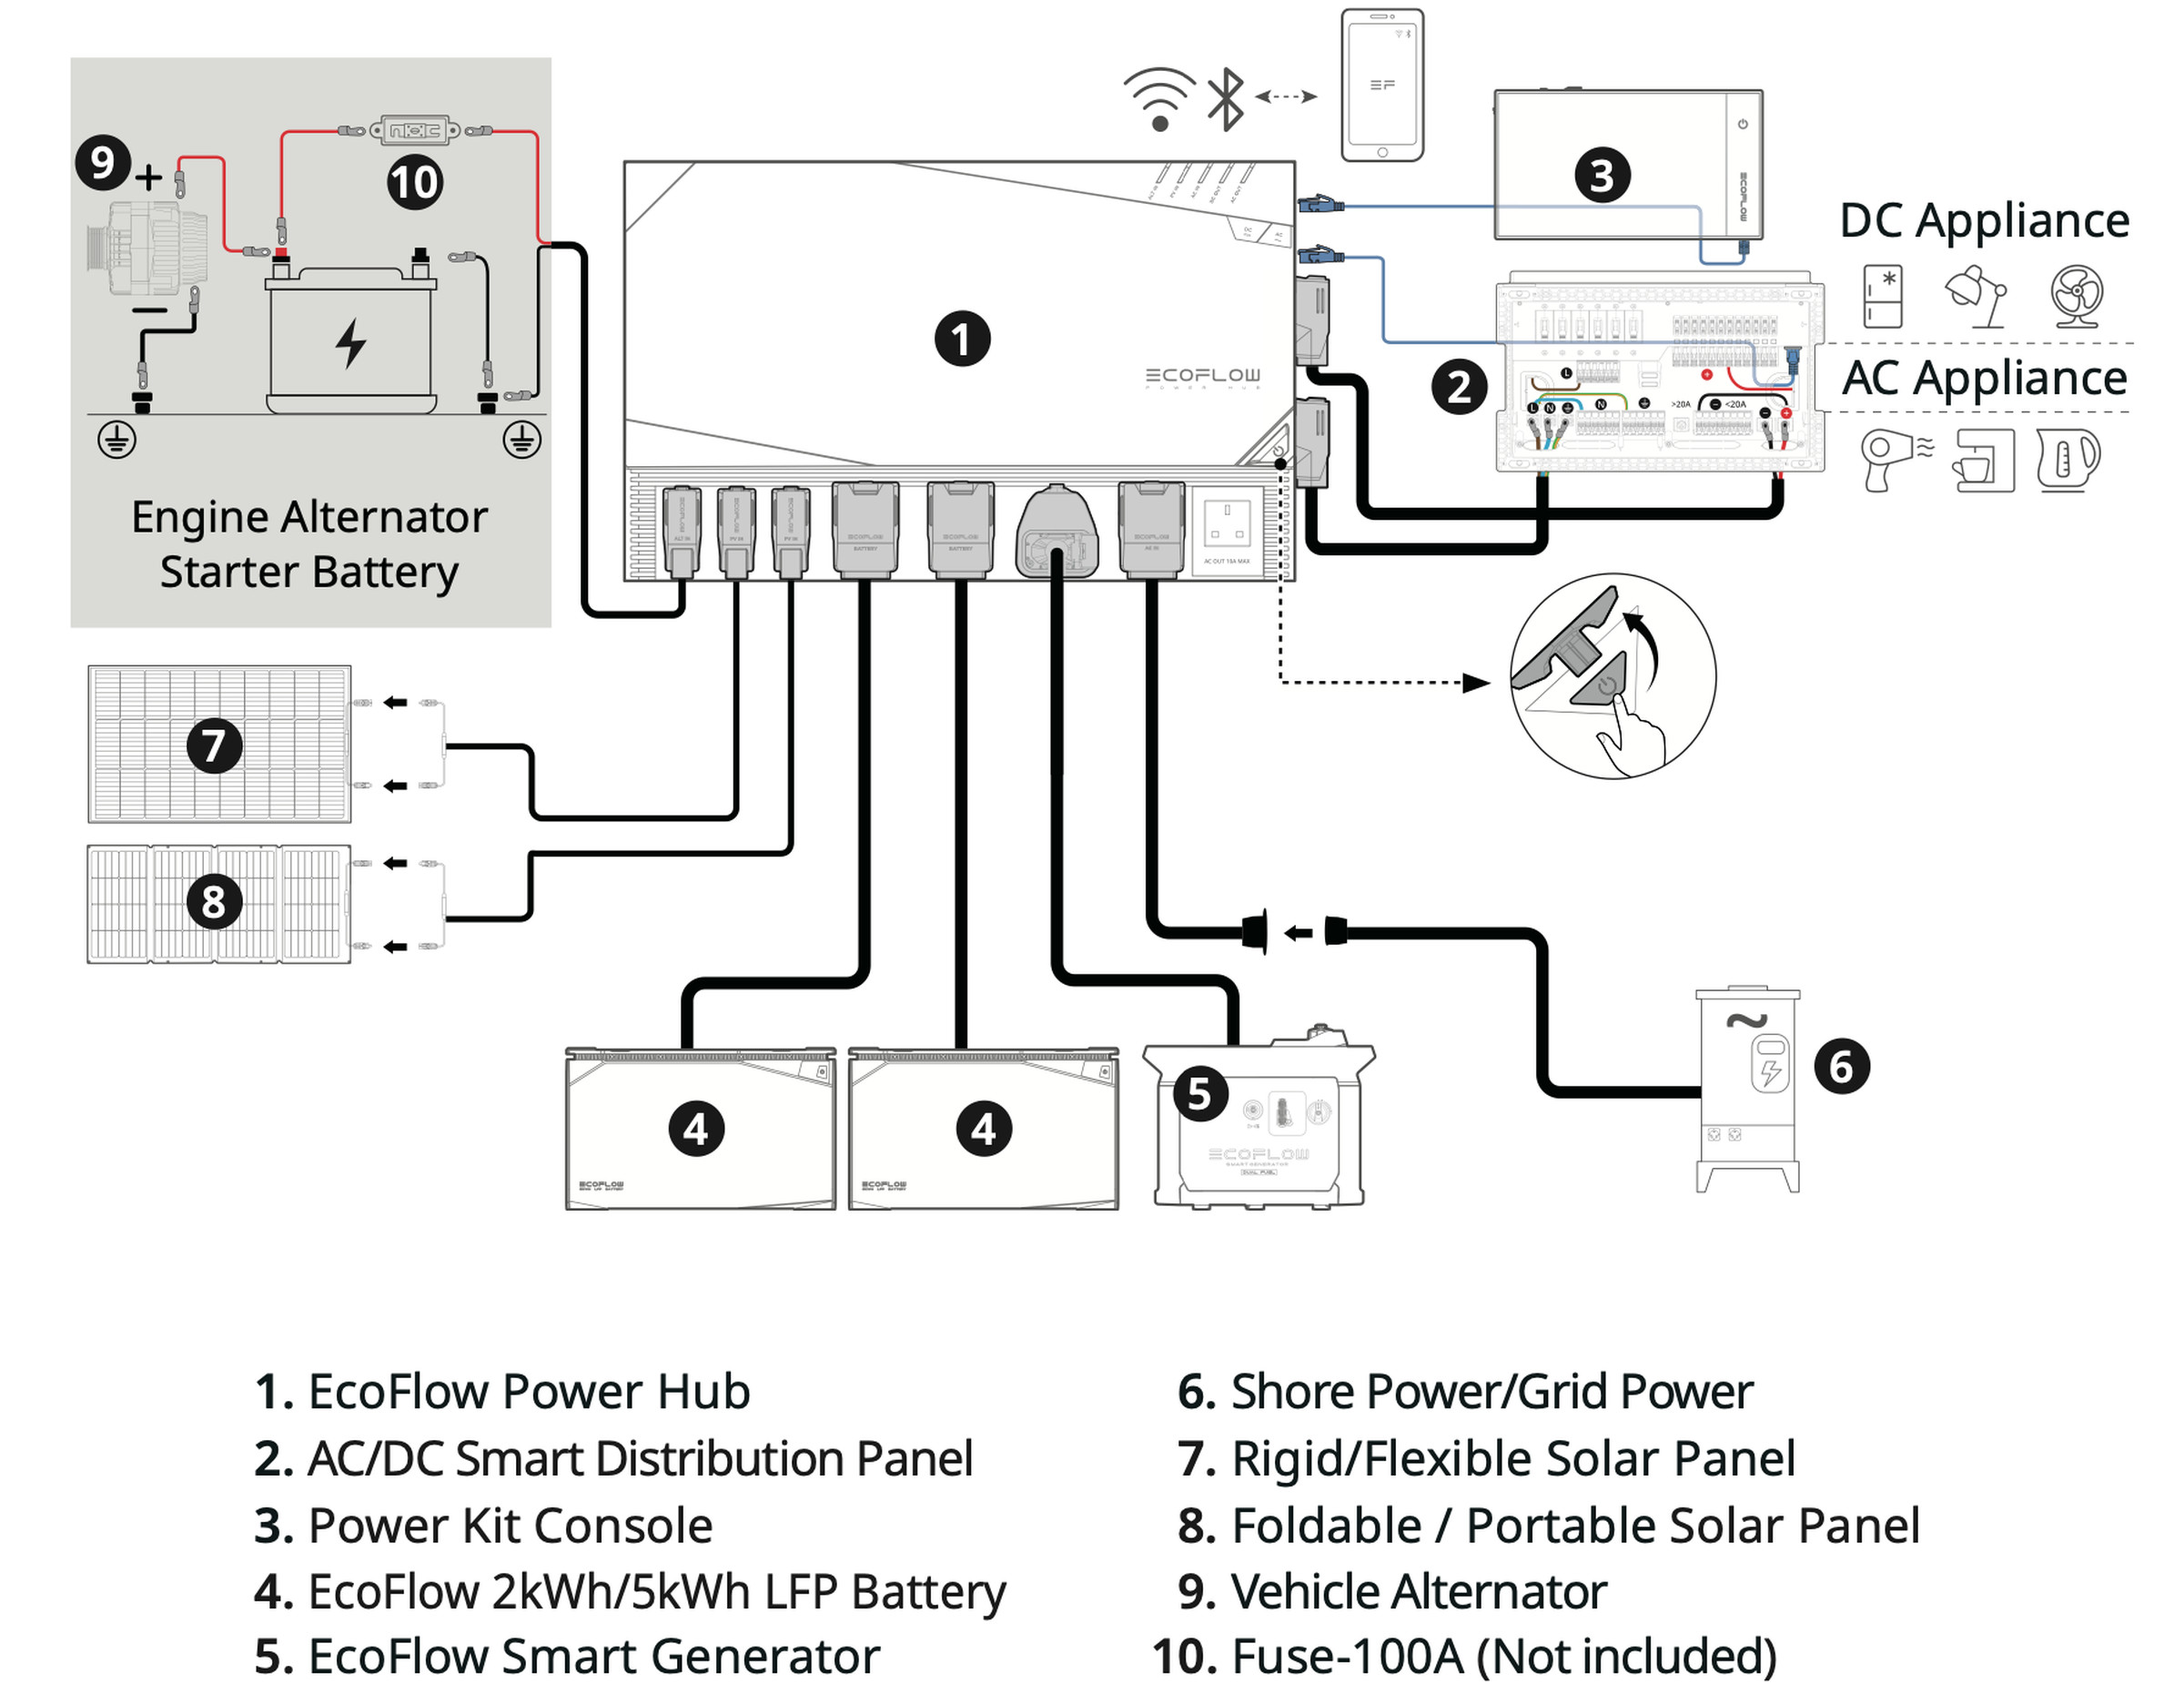 The Power Hub is the central point of connectivity. The EcoFlow Smart Generator (5) can also be a third battery like Fabian’s setup.